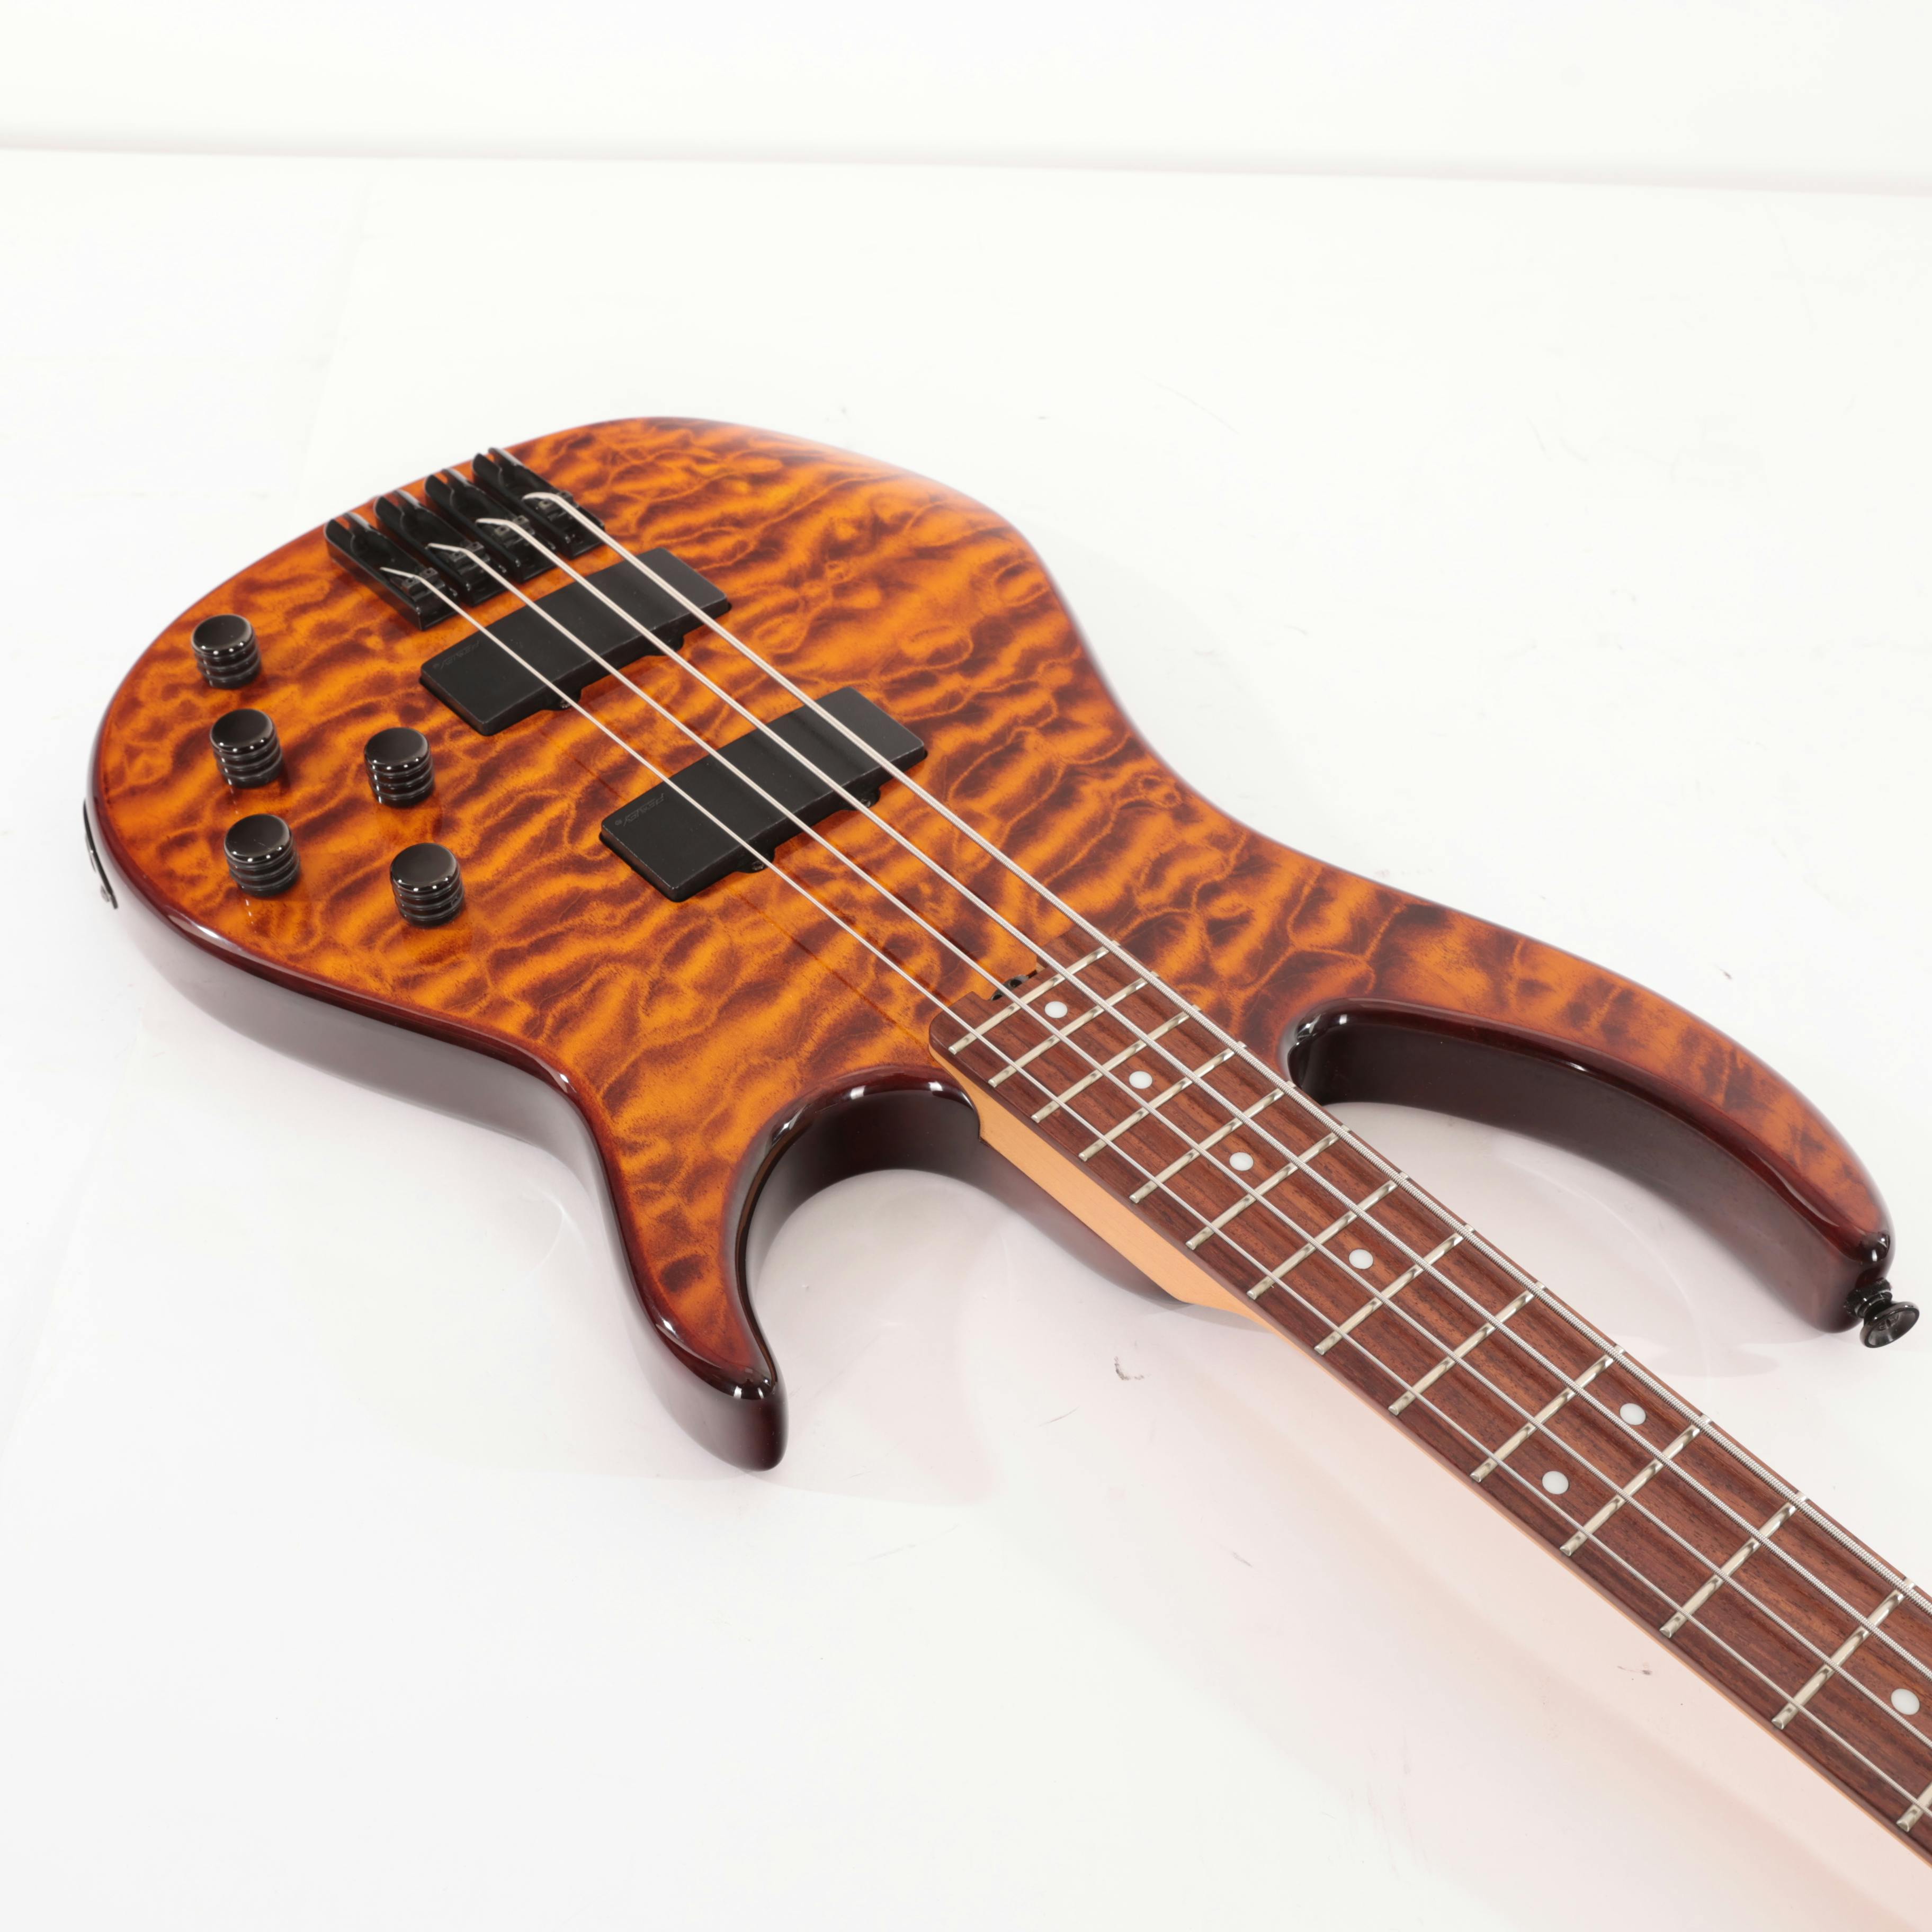 Second Hand Peavey Millenium Bass Ac Bxp In Trans Amber Quilt Top